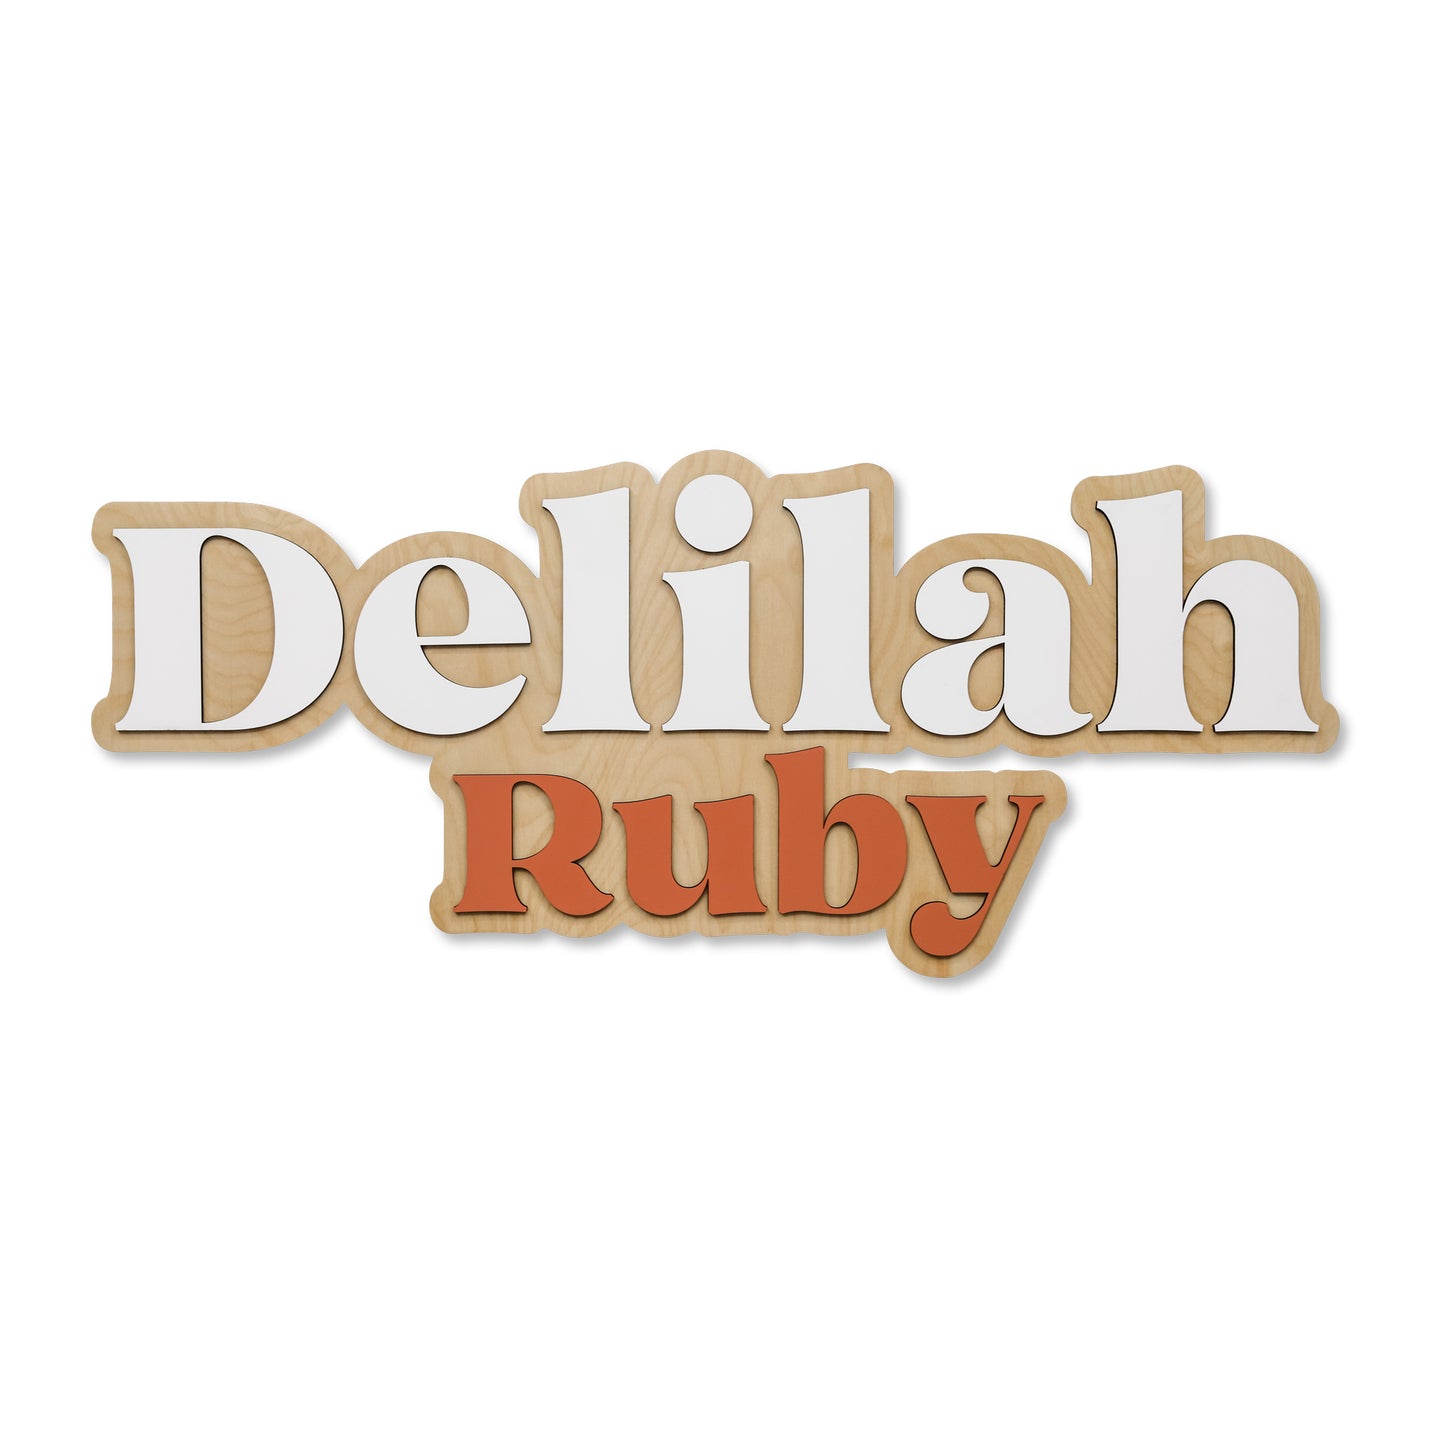 Delilah Ruby Layered Sign